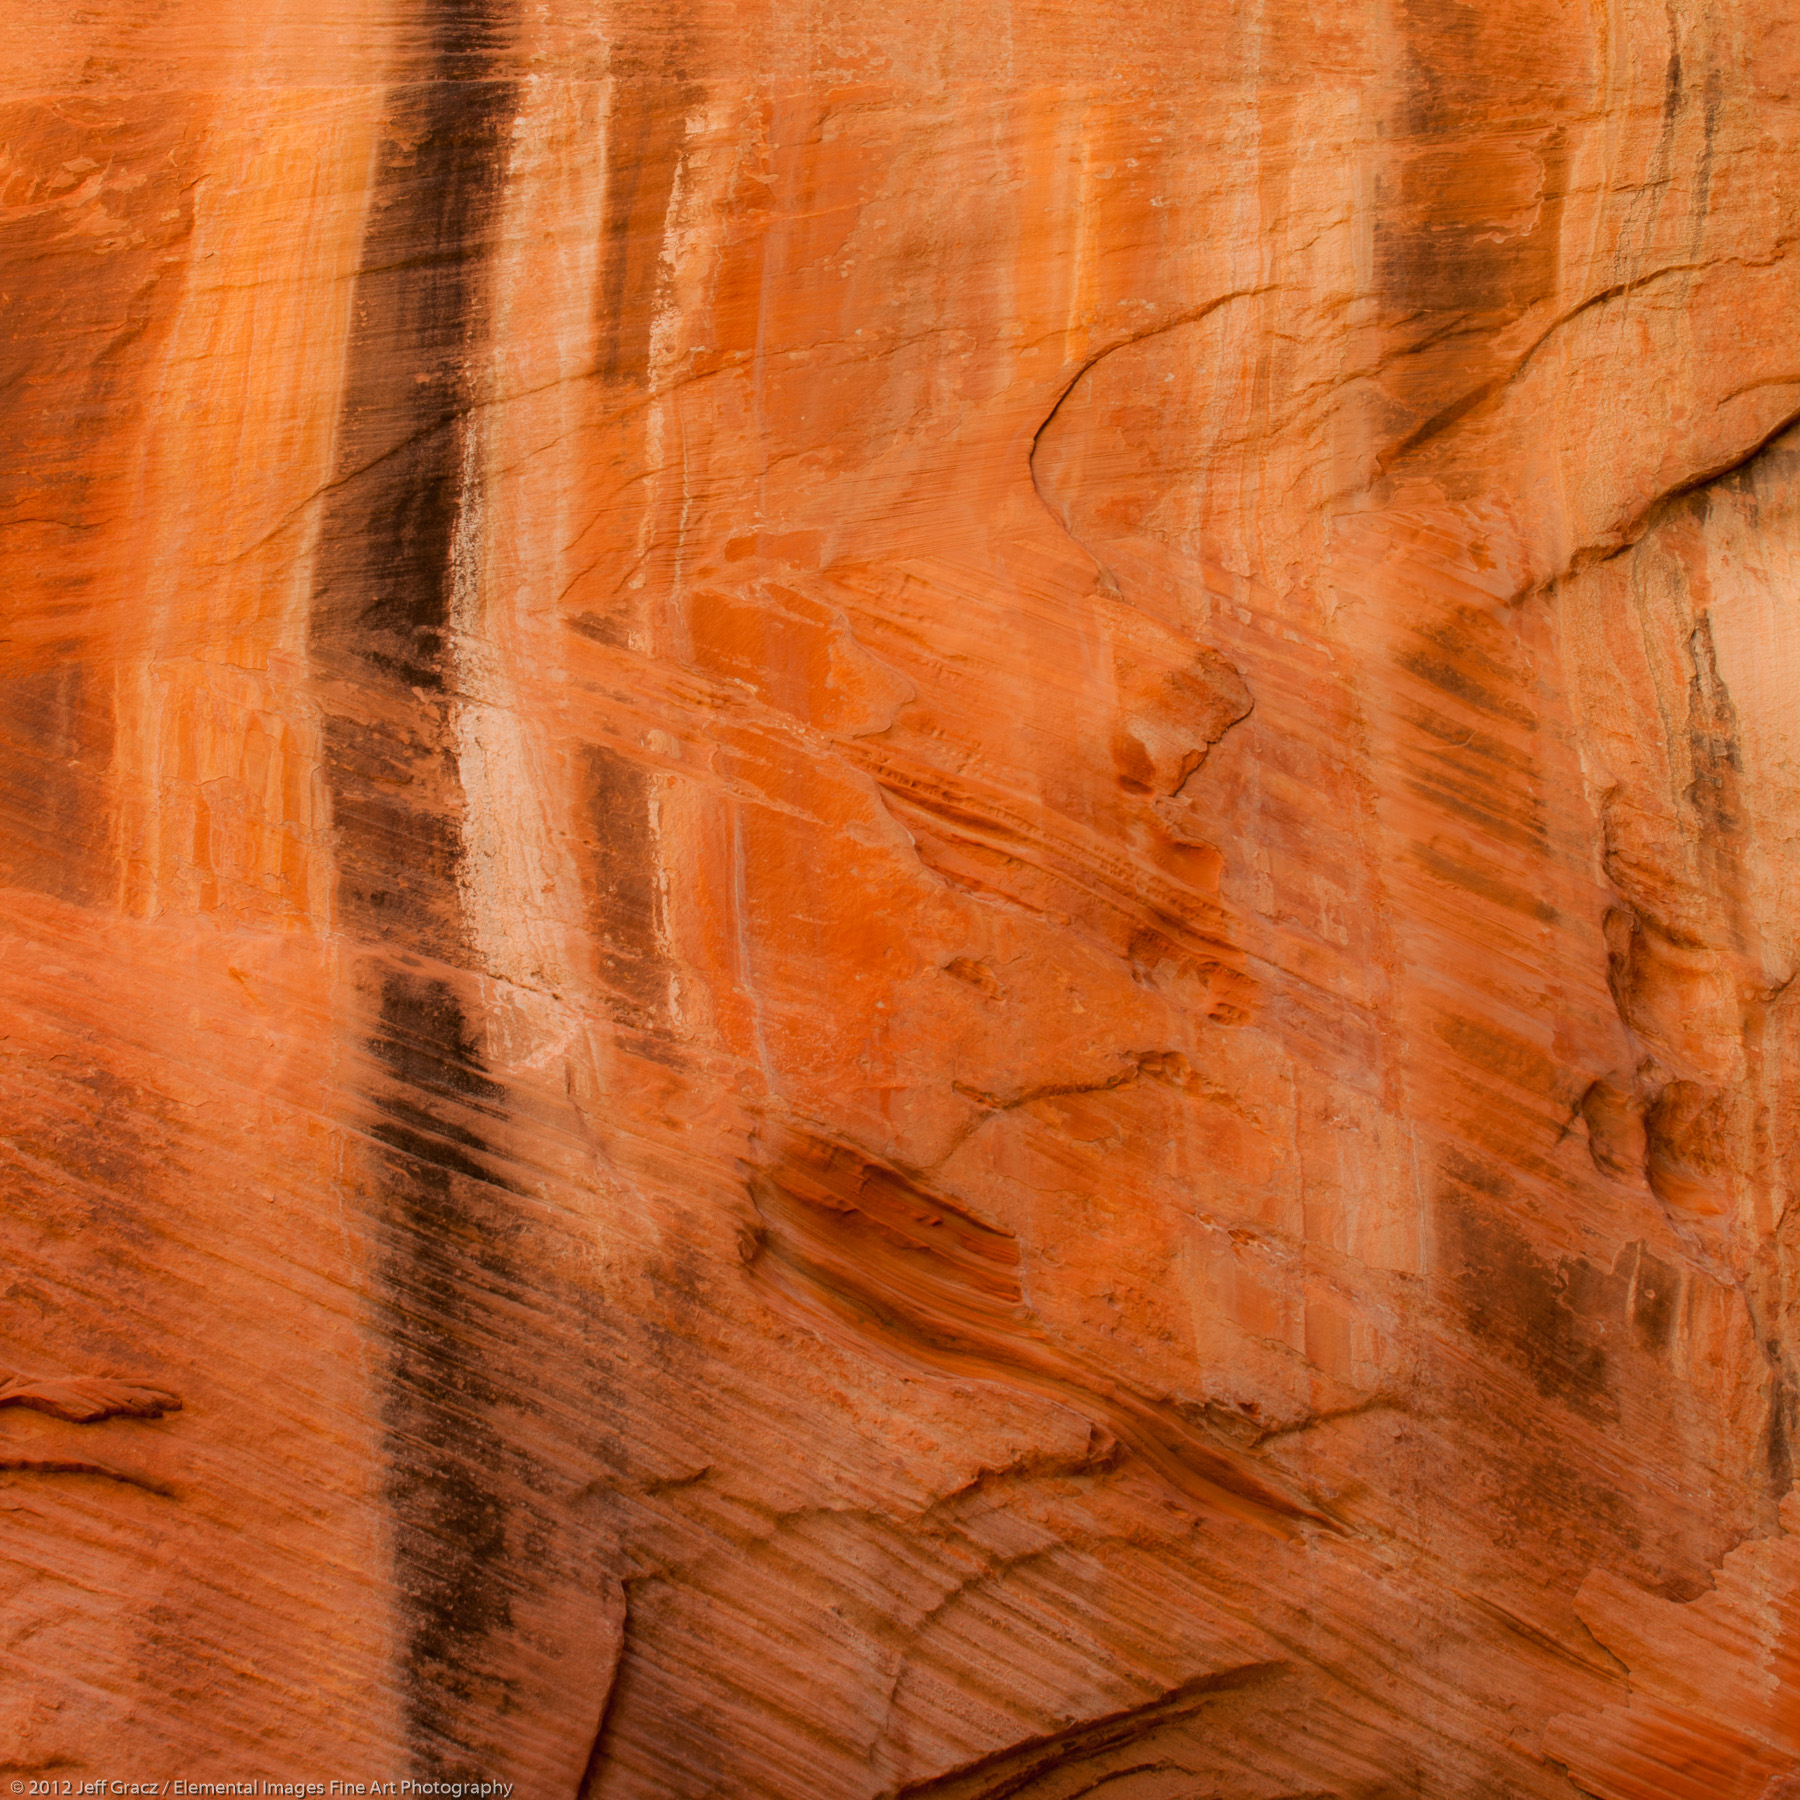 Canyon Wall IV | Zion National Park | UT | USA - © © 2012 Jeff Gracz / Elemental Images Fine Art Photography - All Rights Reserved Worldwide